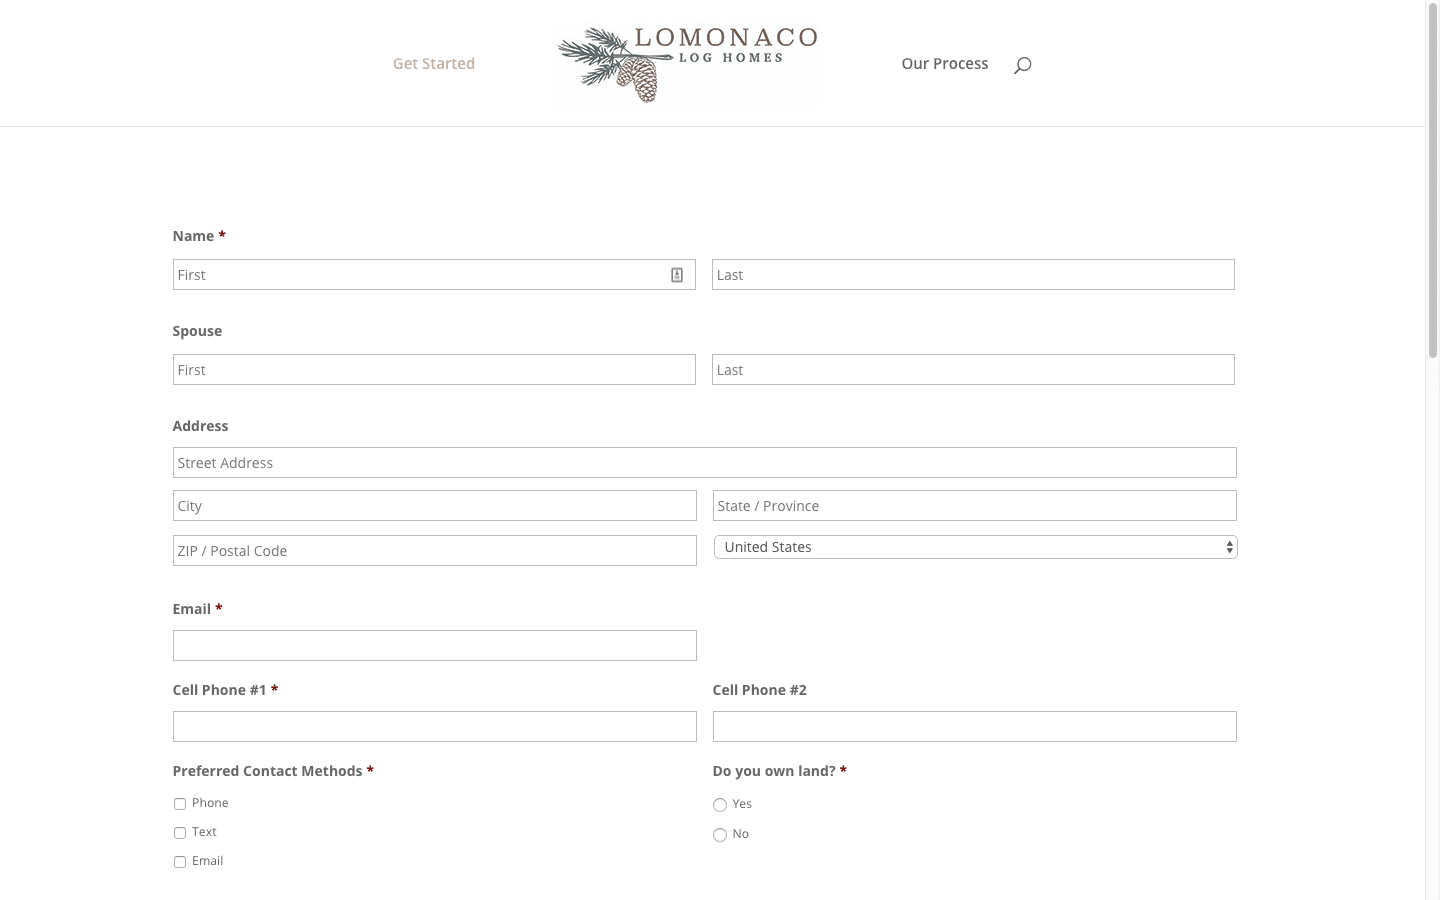 lengthy form designed to qualify the customer